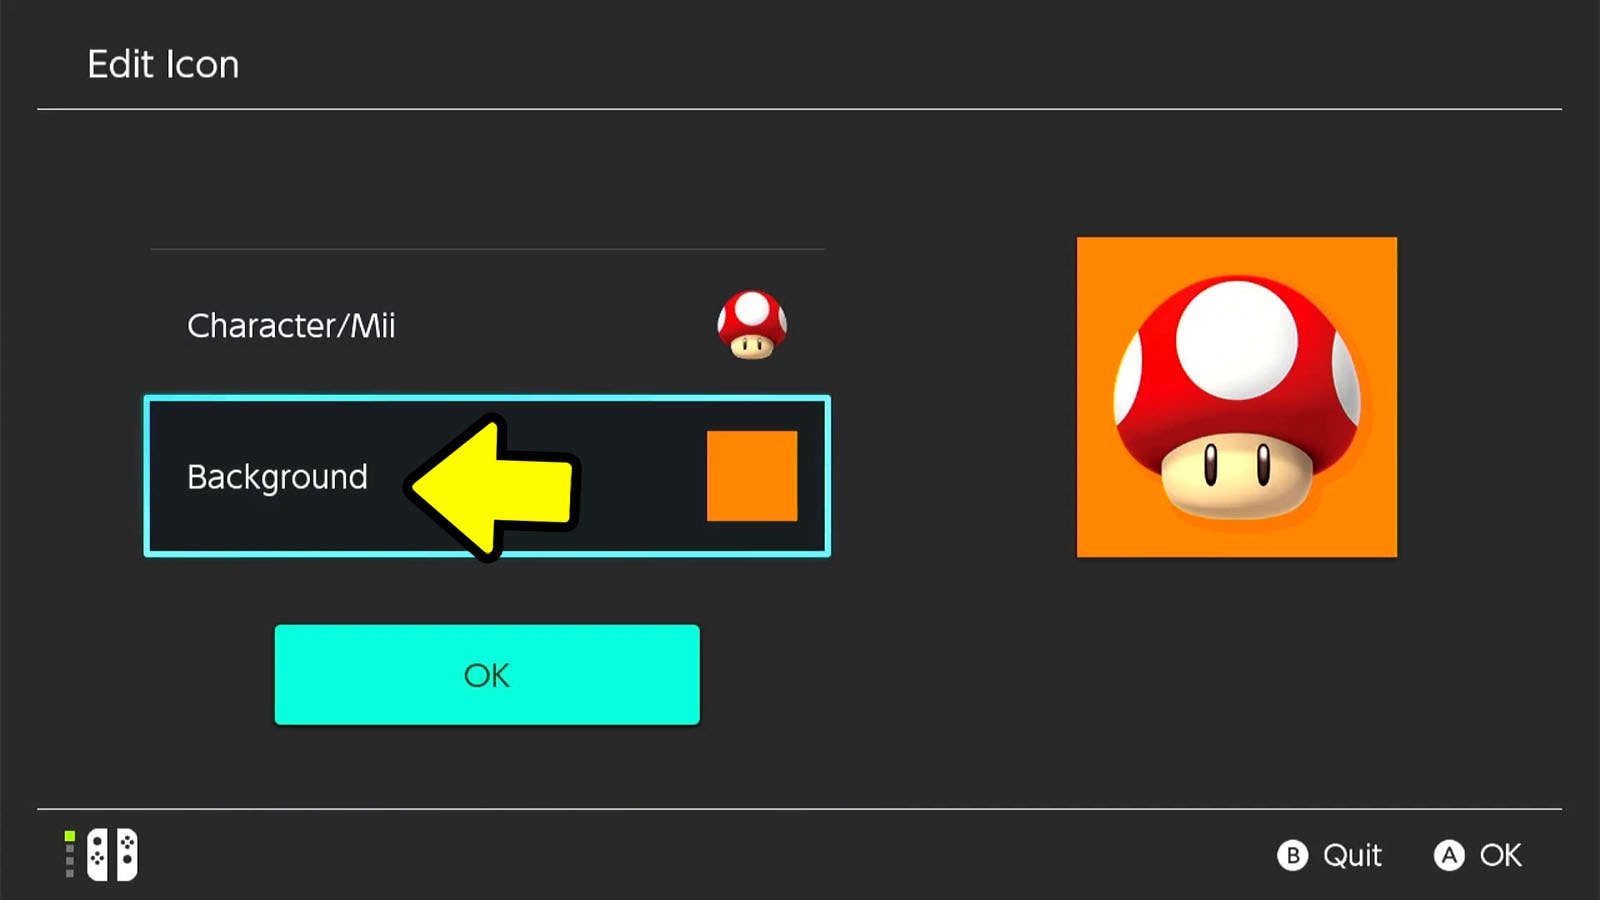 Nintendo Switch edit icon screen with multiple options and a profile picture